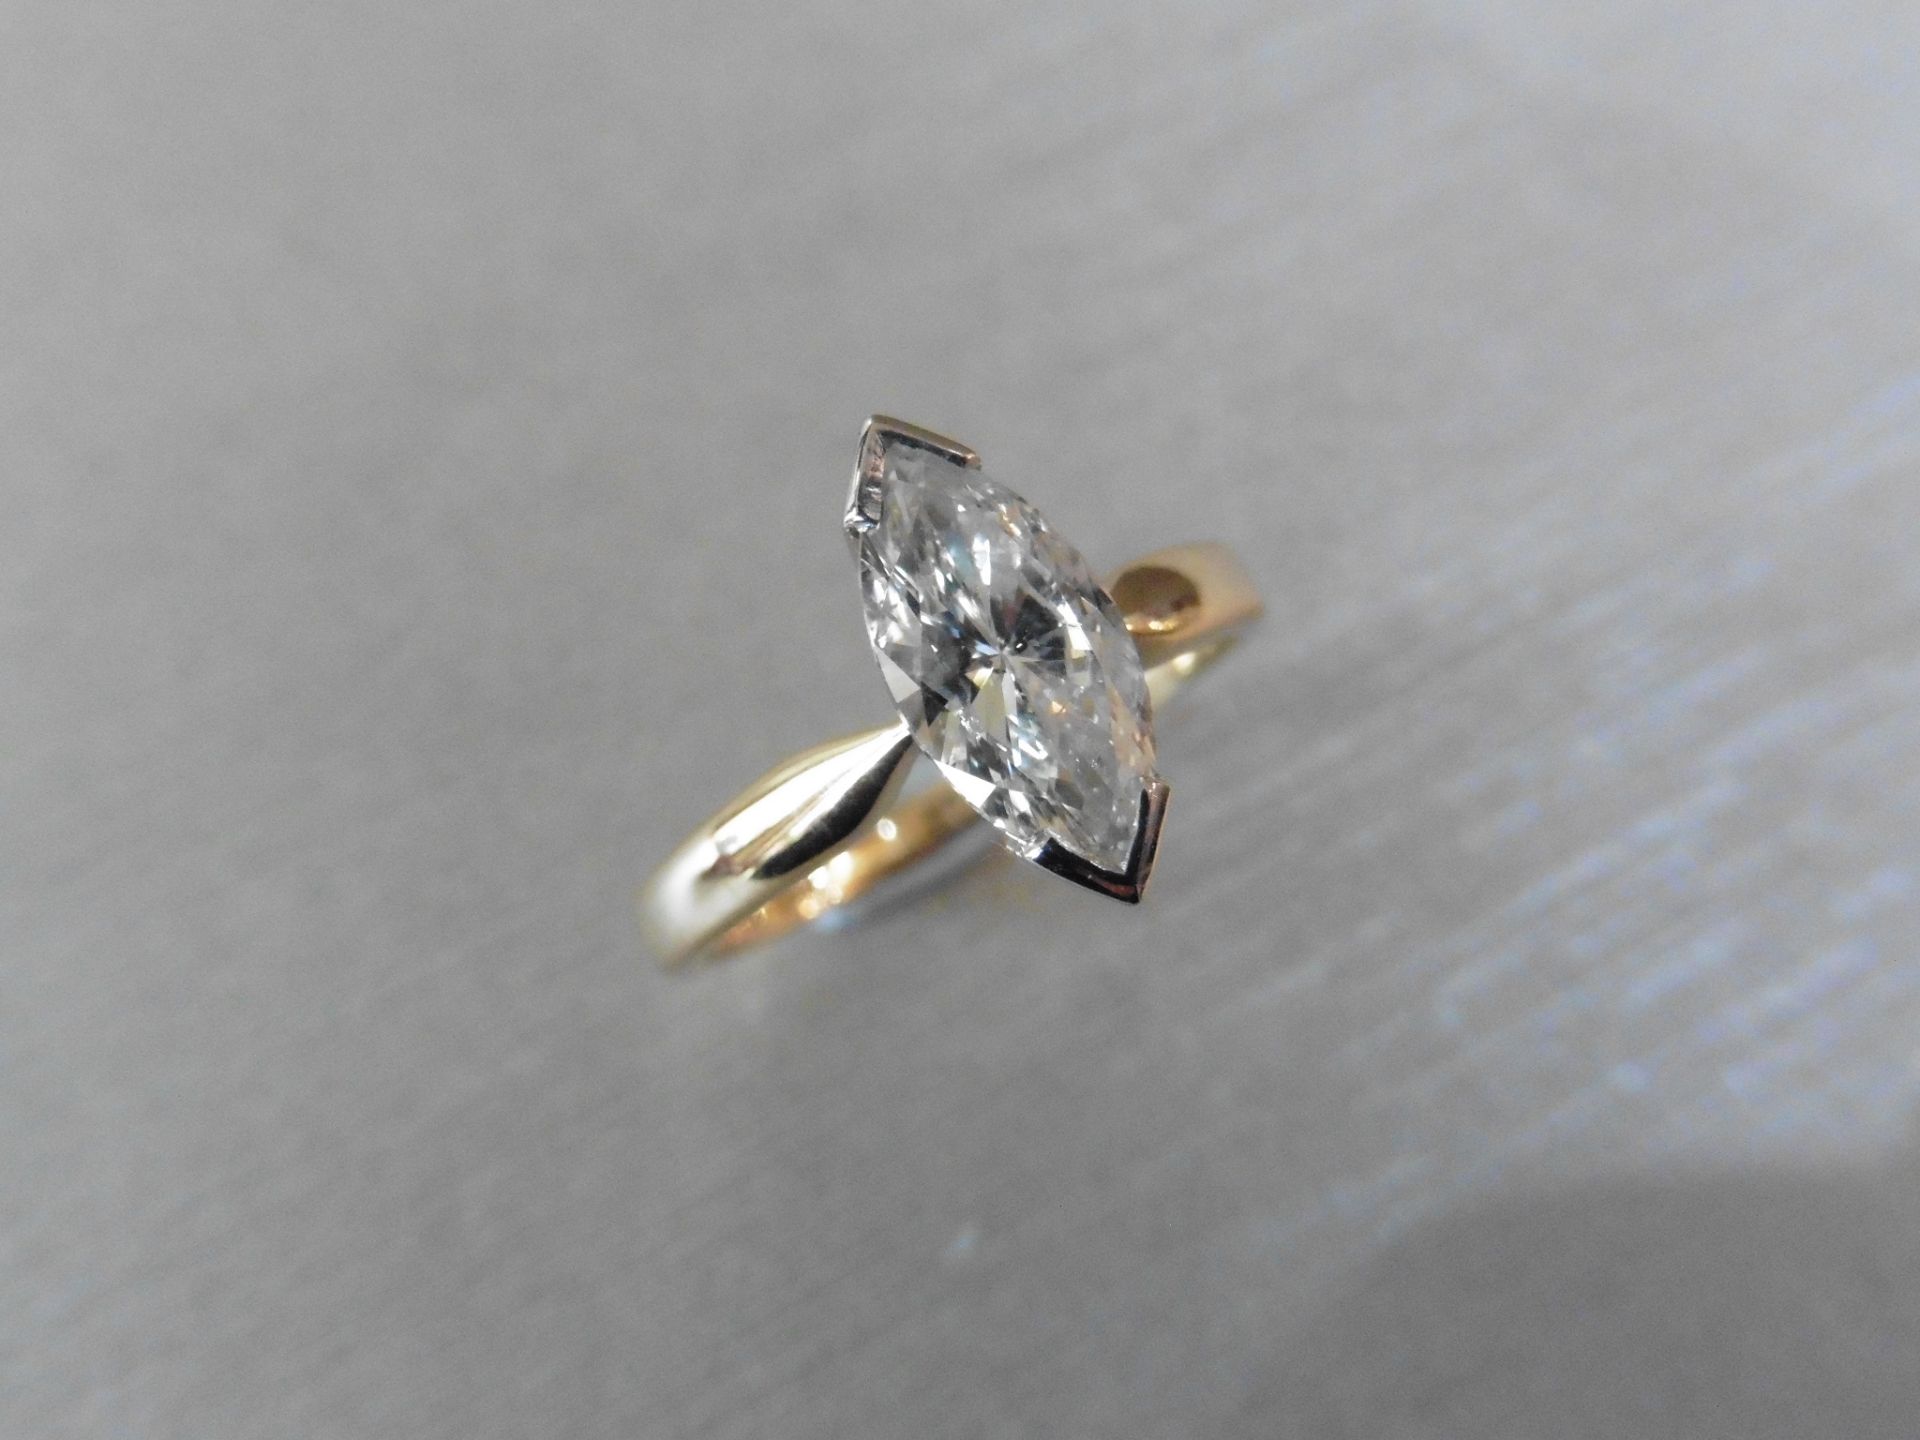 1.15ct marquise cut diamond solitaire ring. F colour Si2 clarity. 11.32 x 5.47 x 3.23mm. Set in